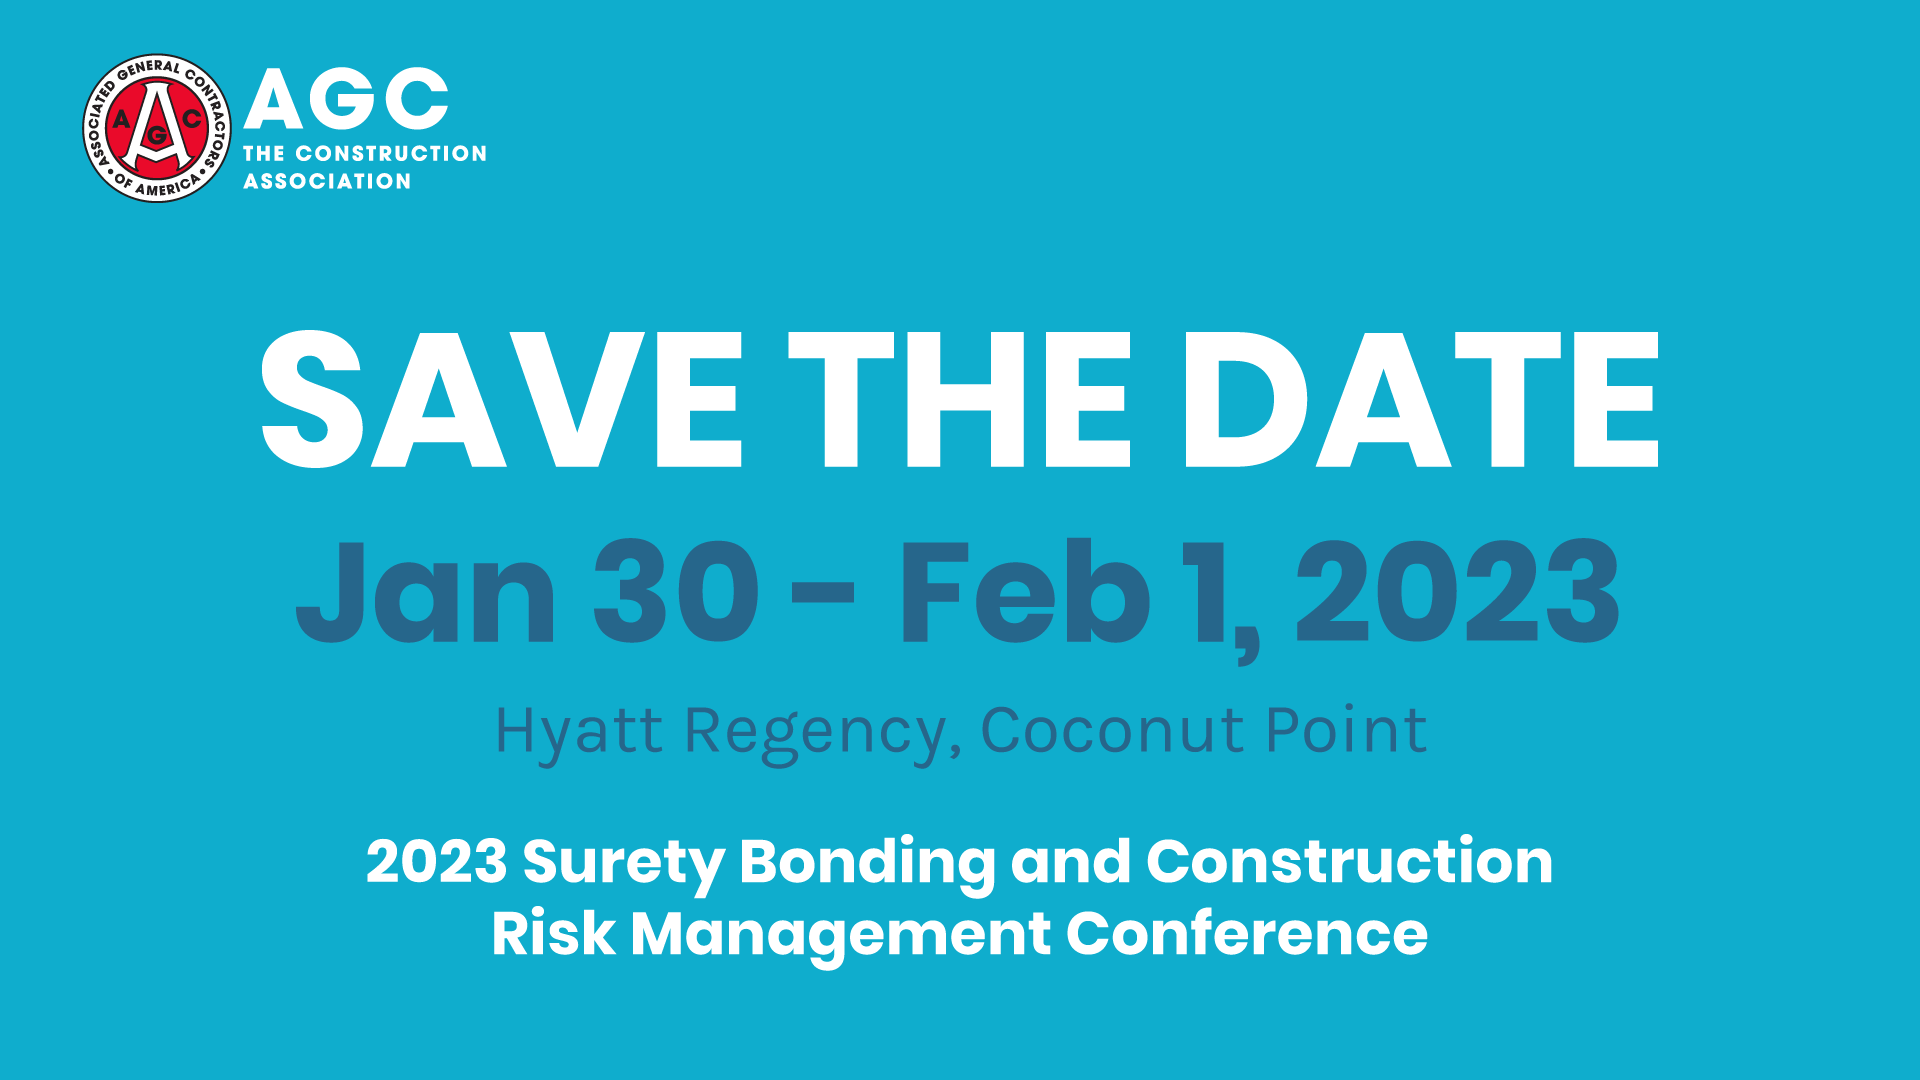 Save the Date, Jan 30 - Feb 1, 2023, 2023 Surety Bonding and Construction Risk Management Conference